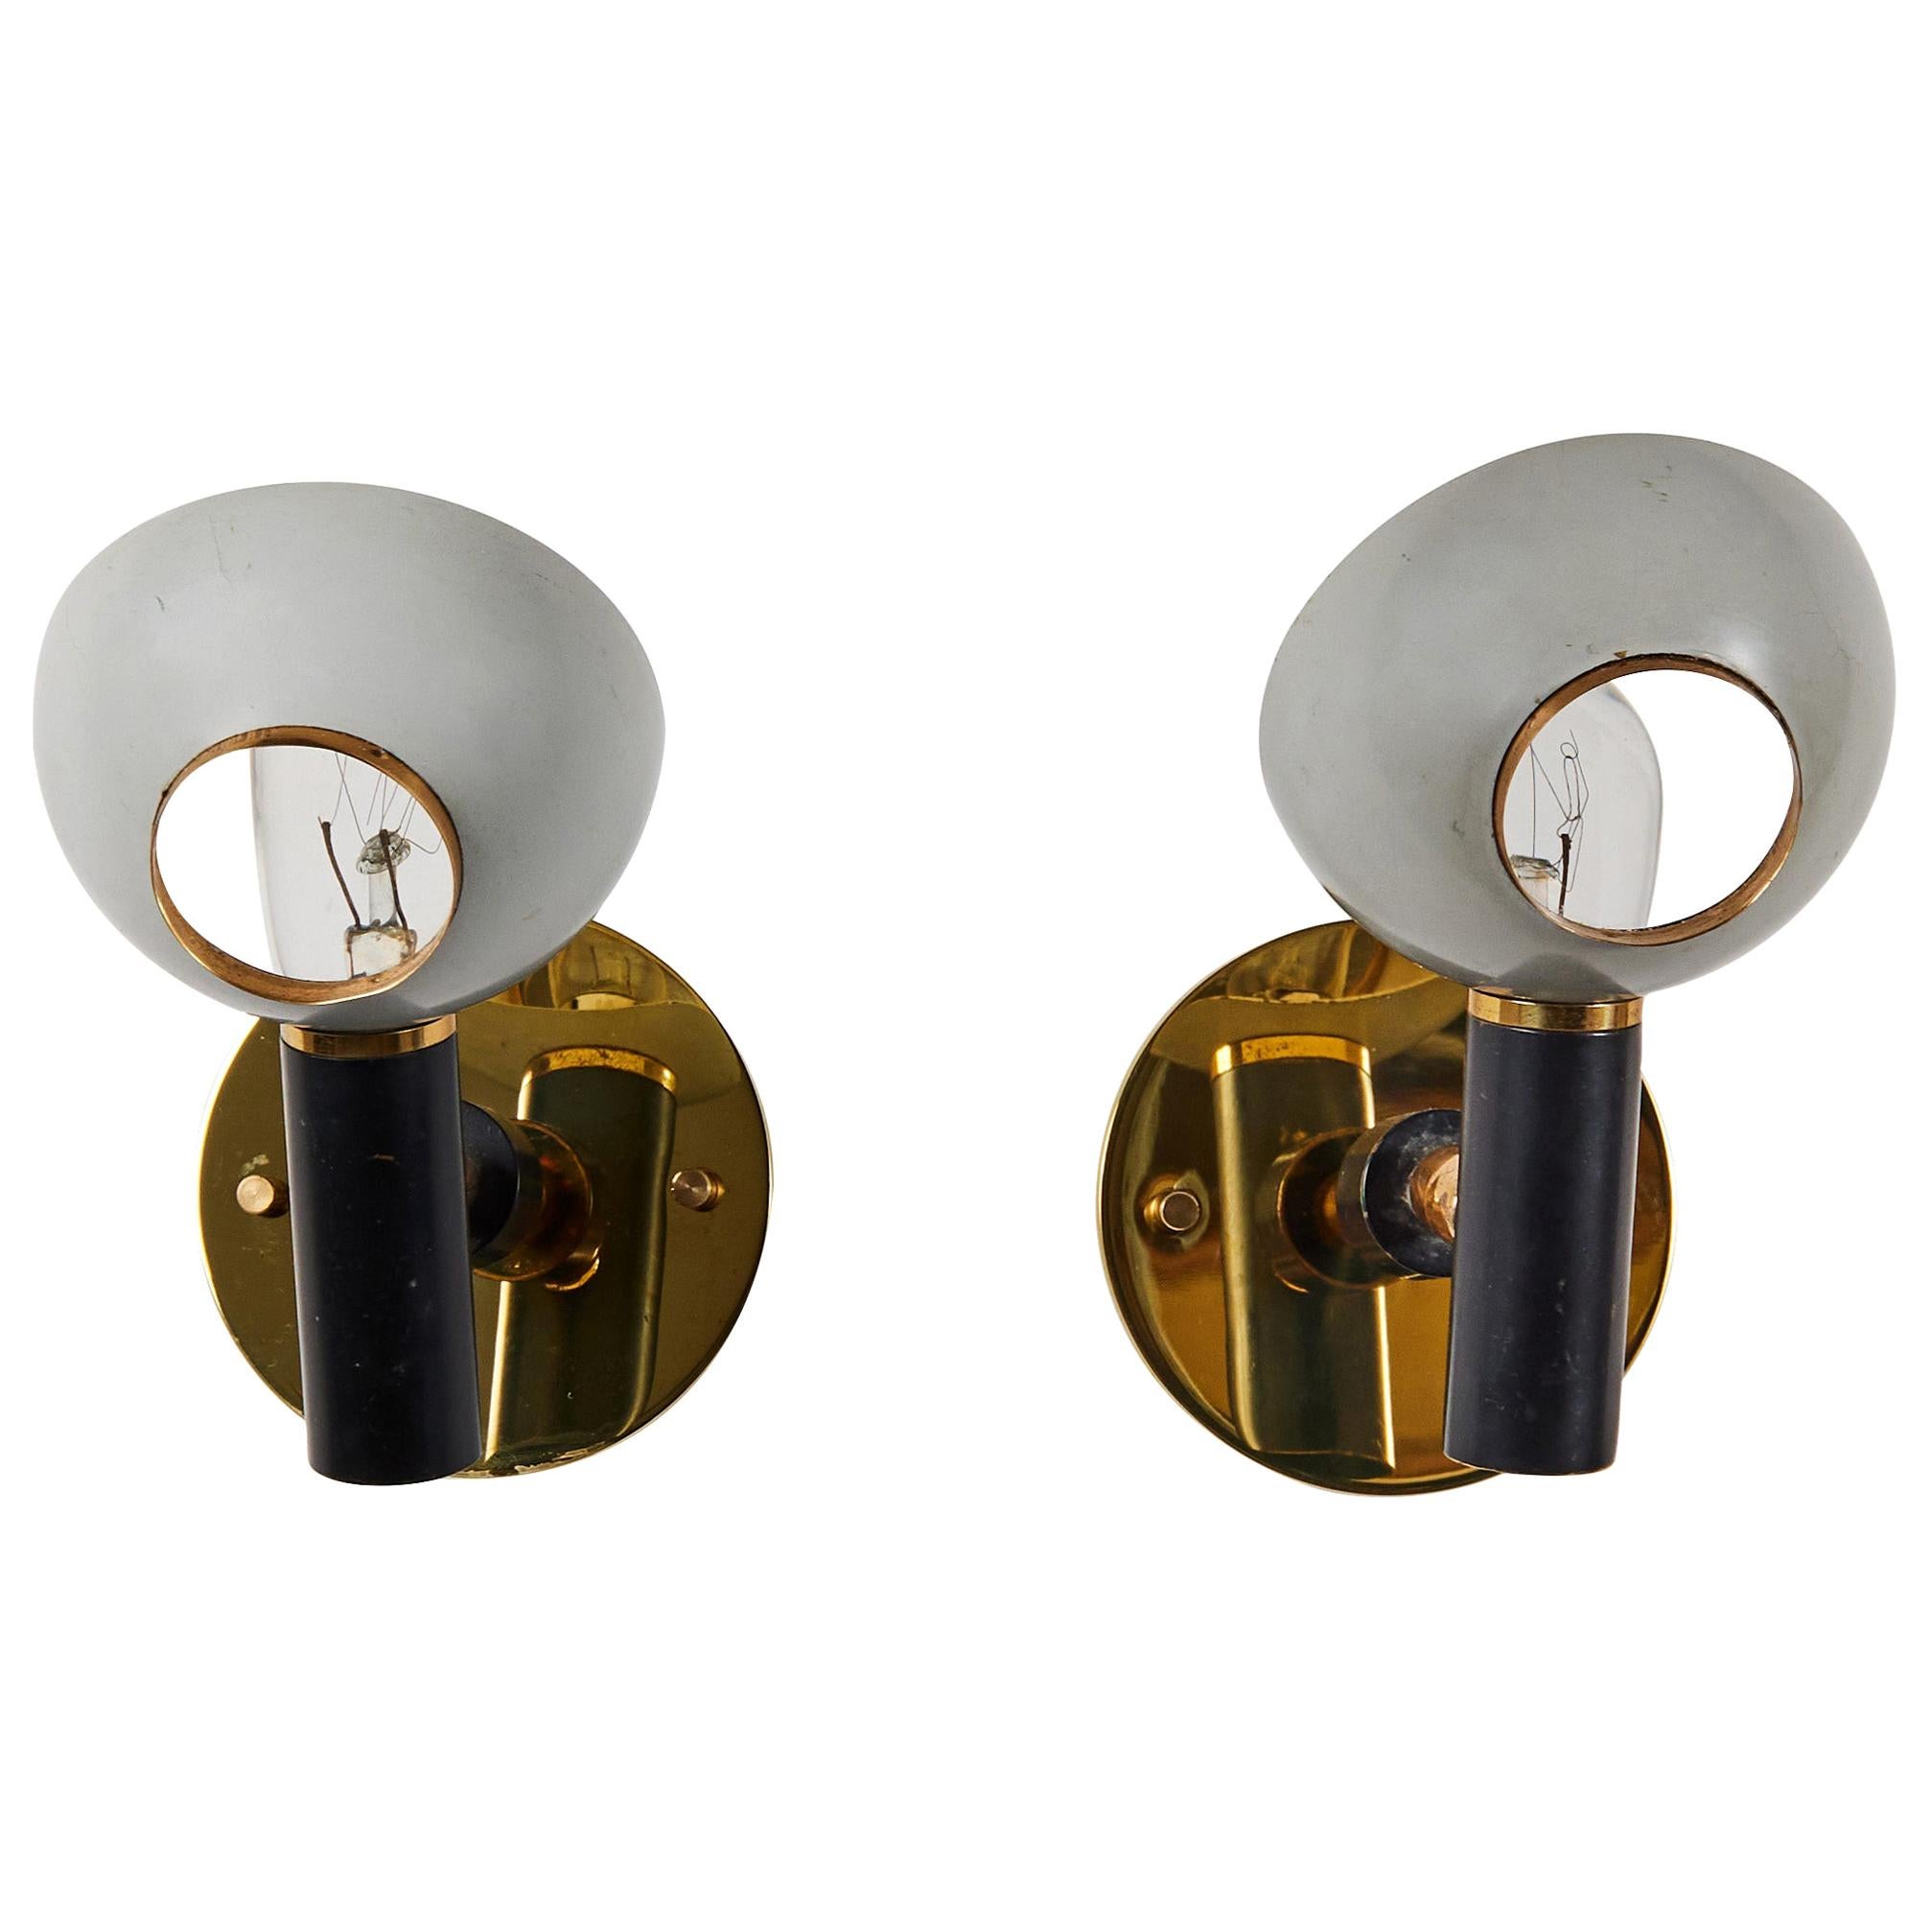 Pair of Sconces by Oscar Torlasco for Lumi